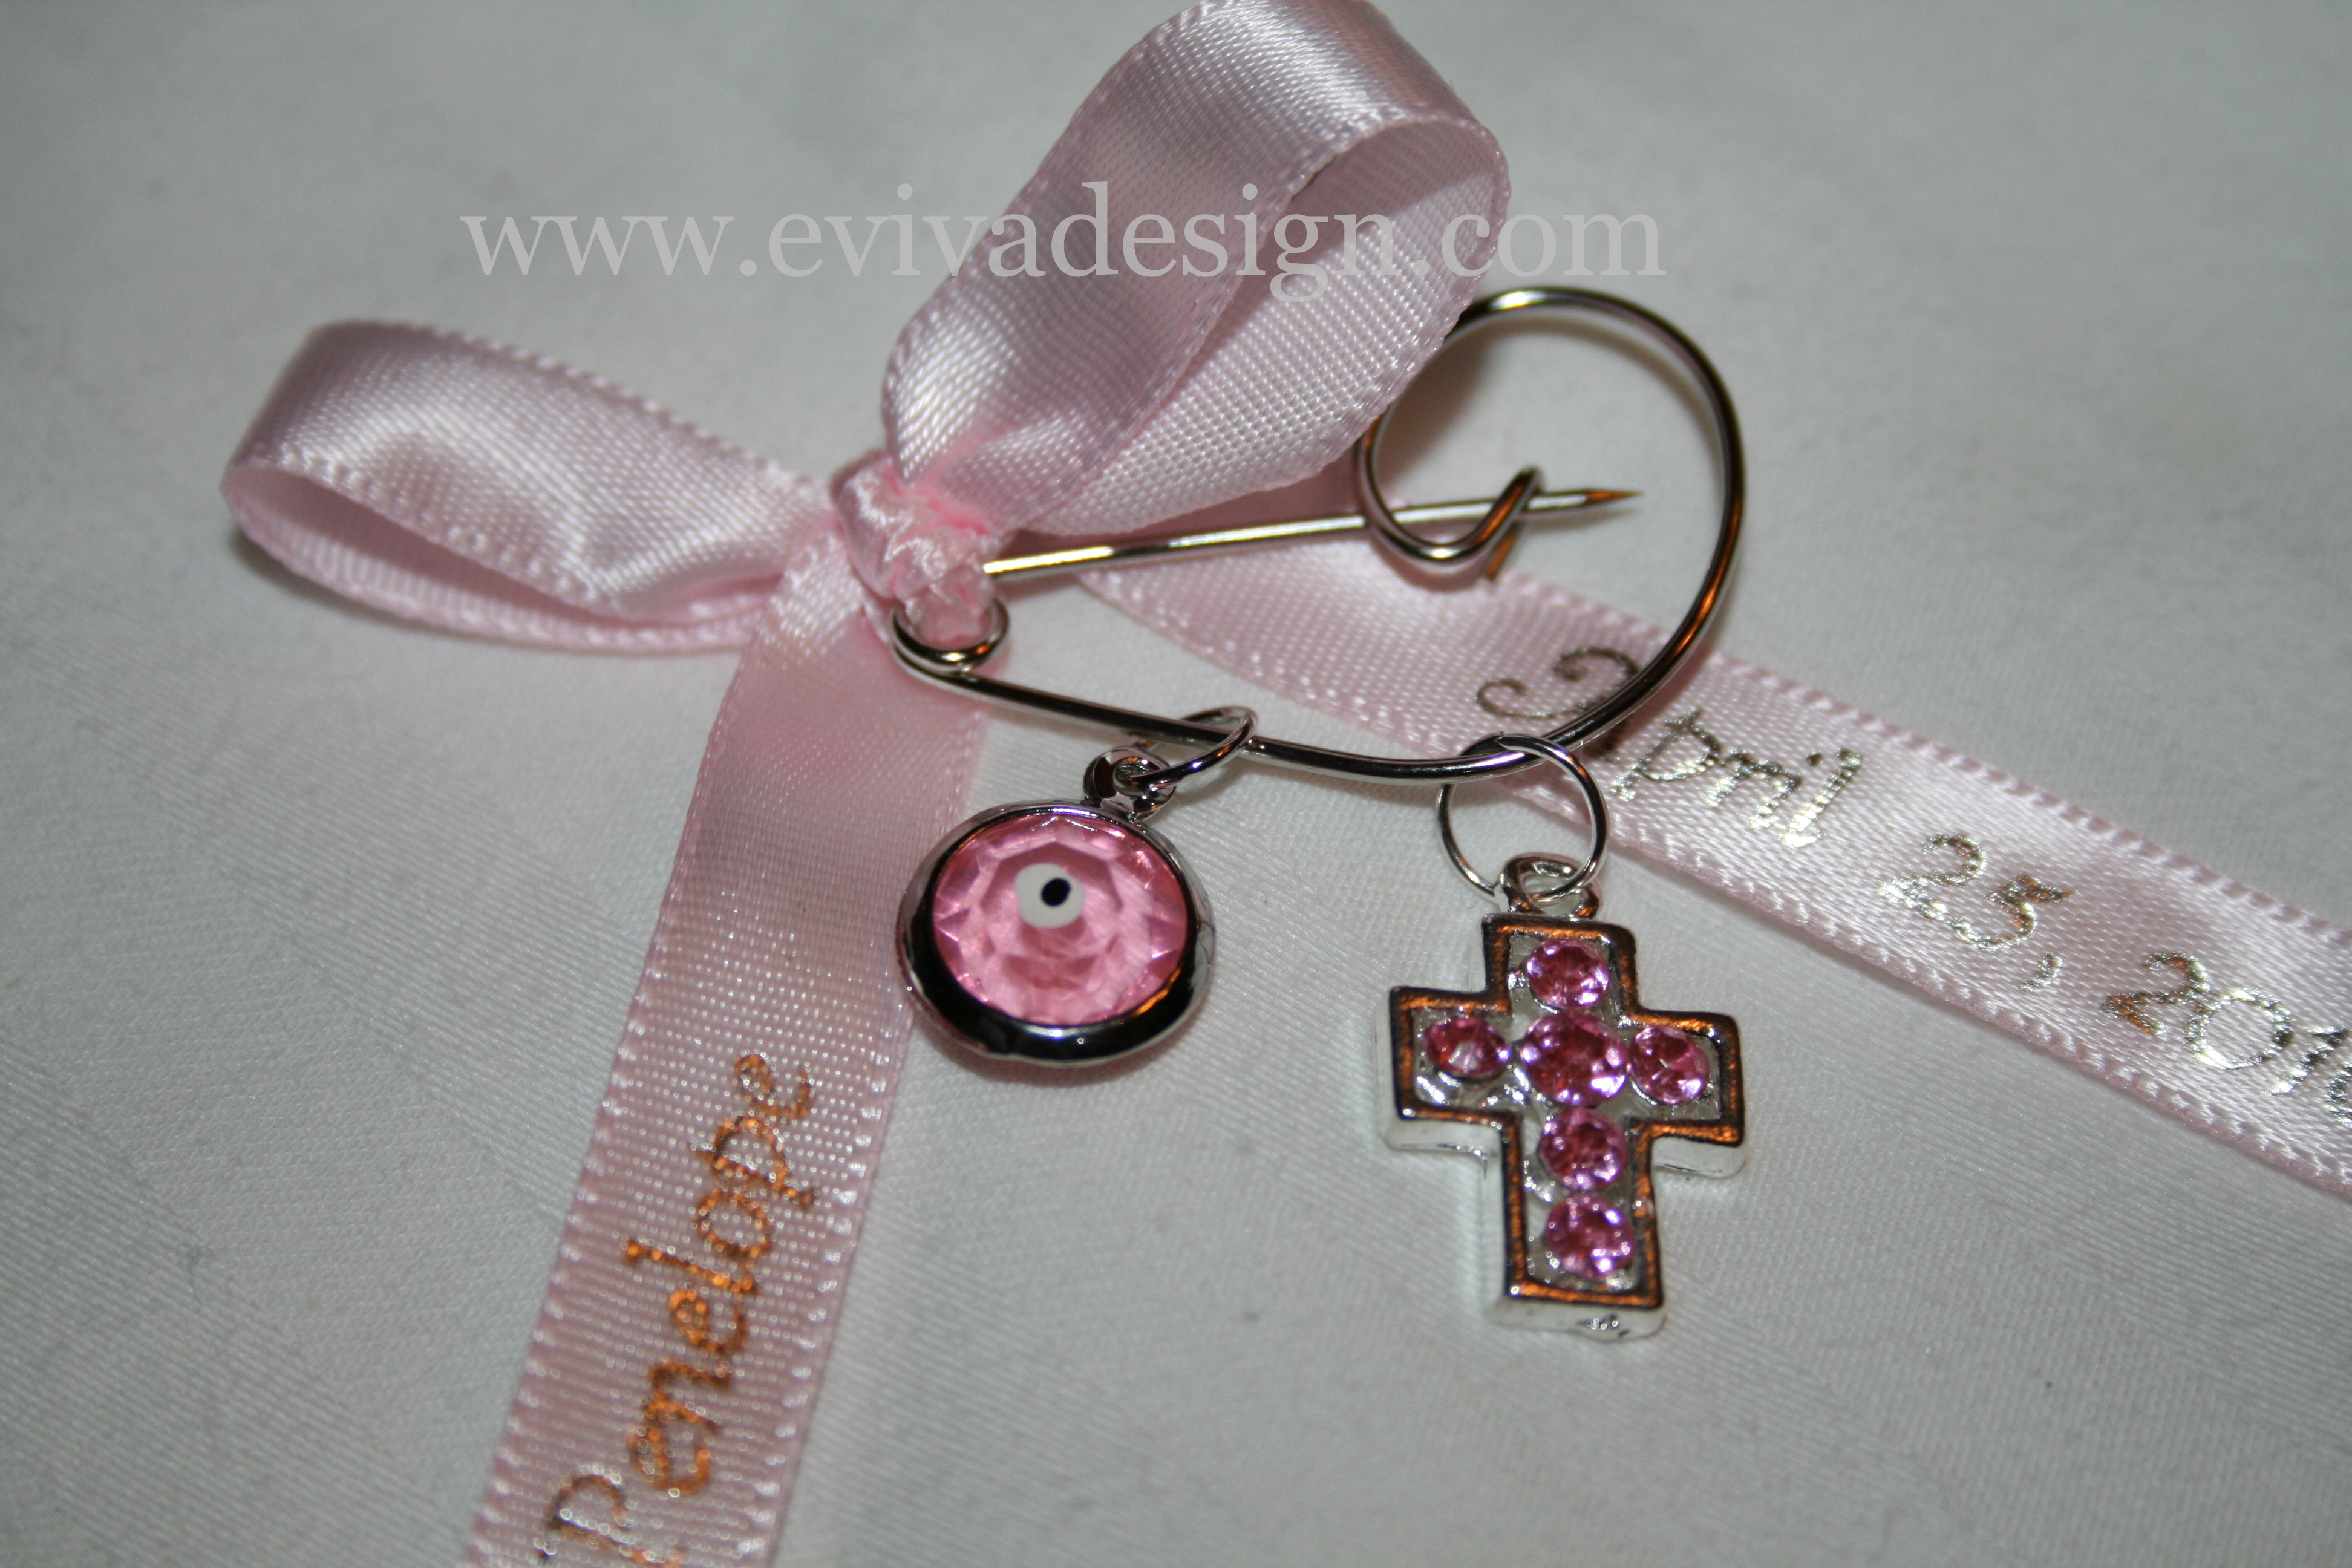 Martyrika-Witness Pins 50pcs For Girl Brooch Pink Cord Rotten Apple Color Ribbon Tulle Pearl White Cross